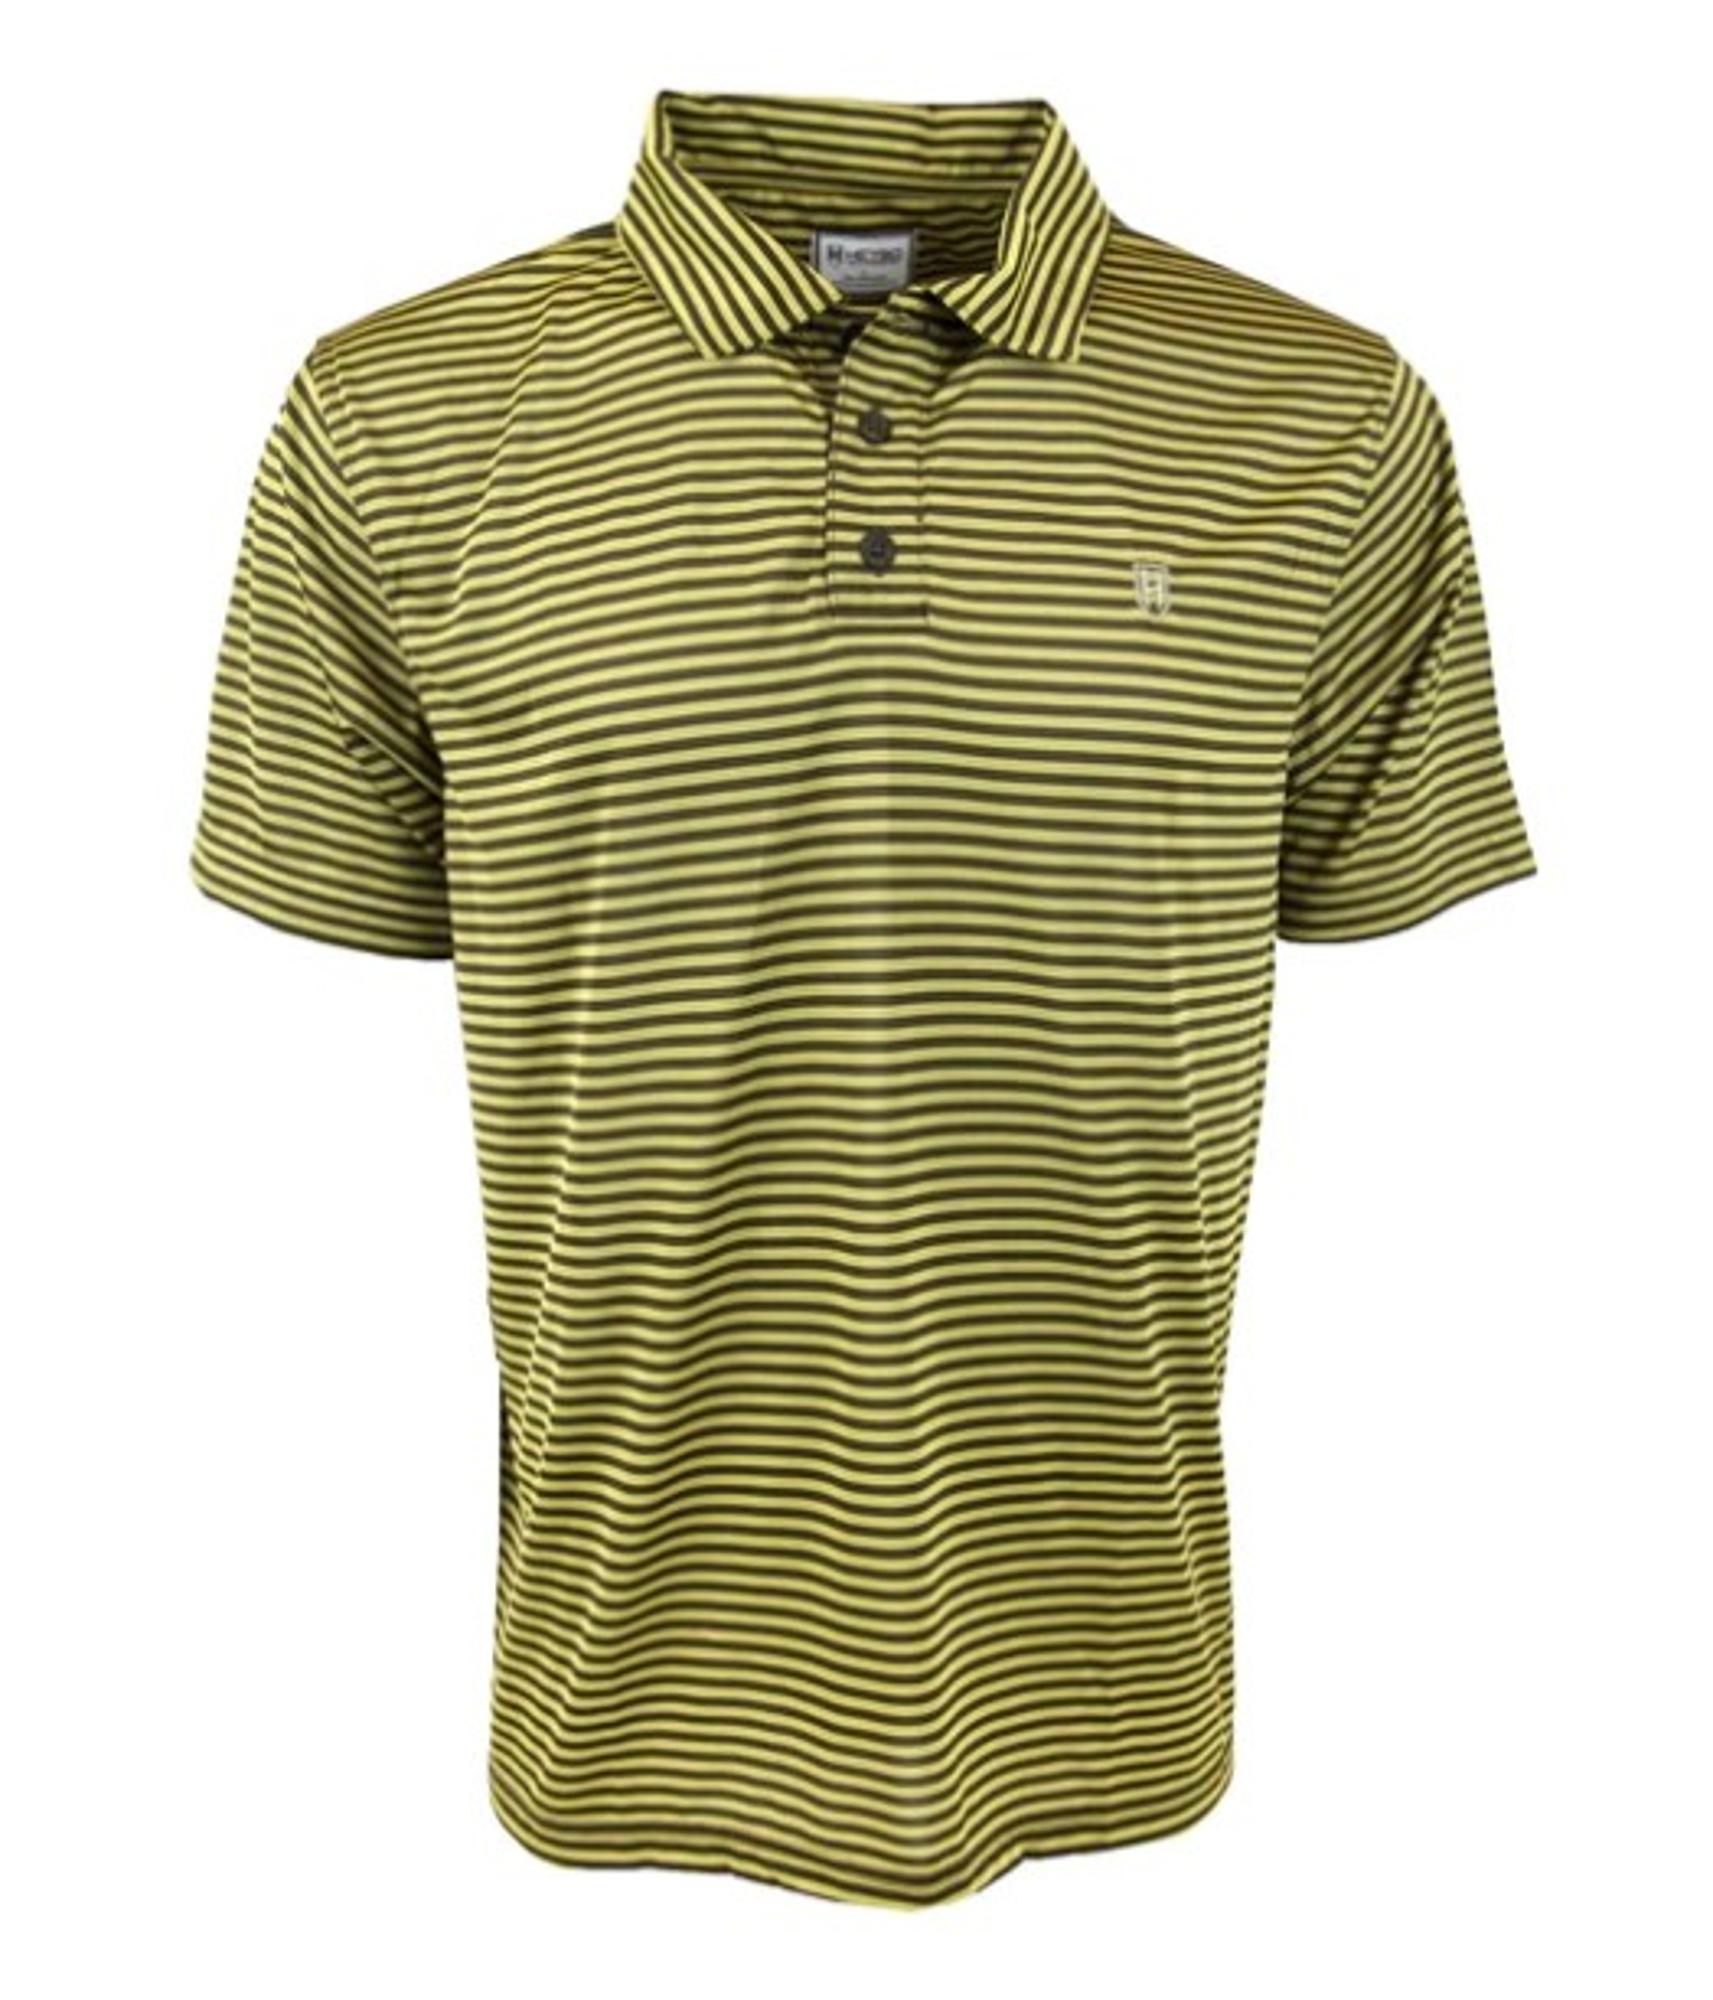 Wanderer Performance Striped Polo